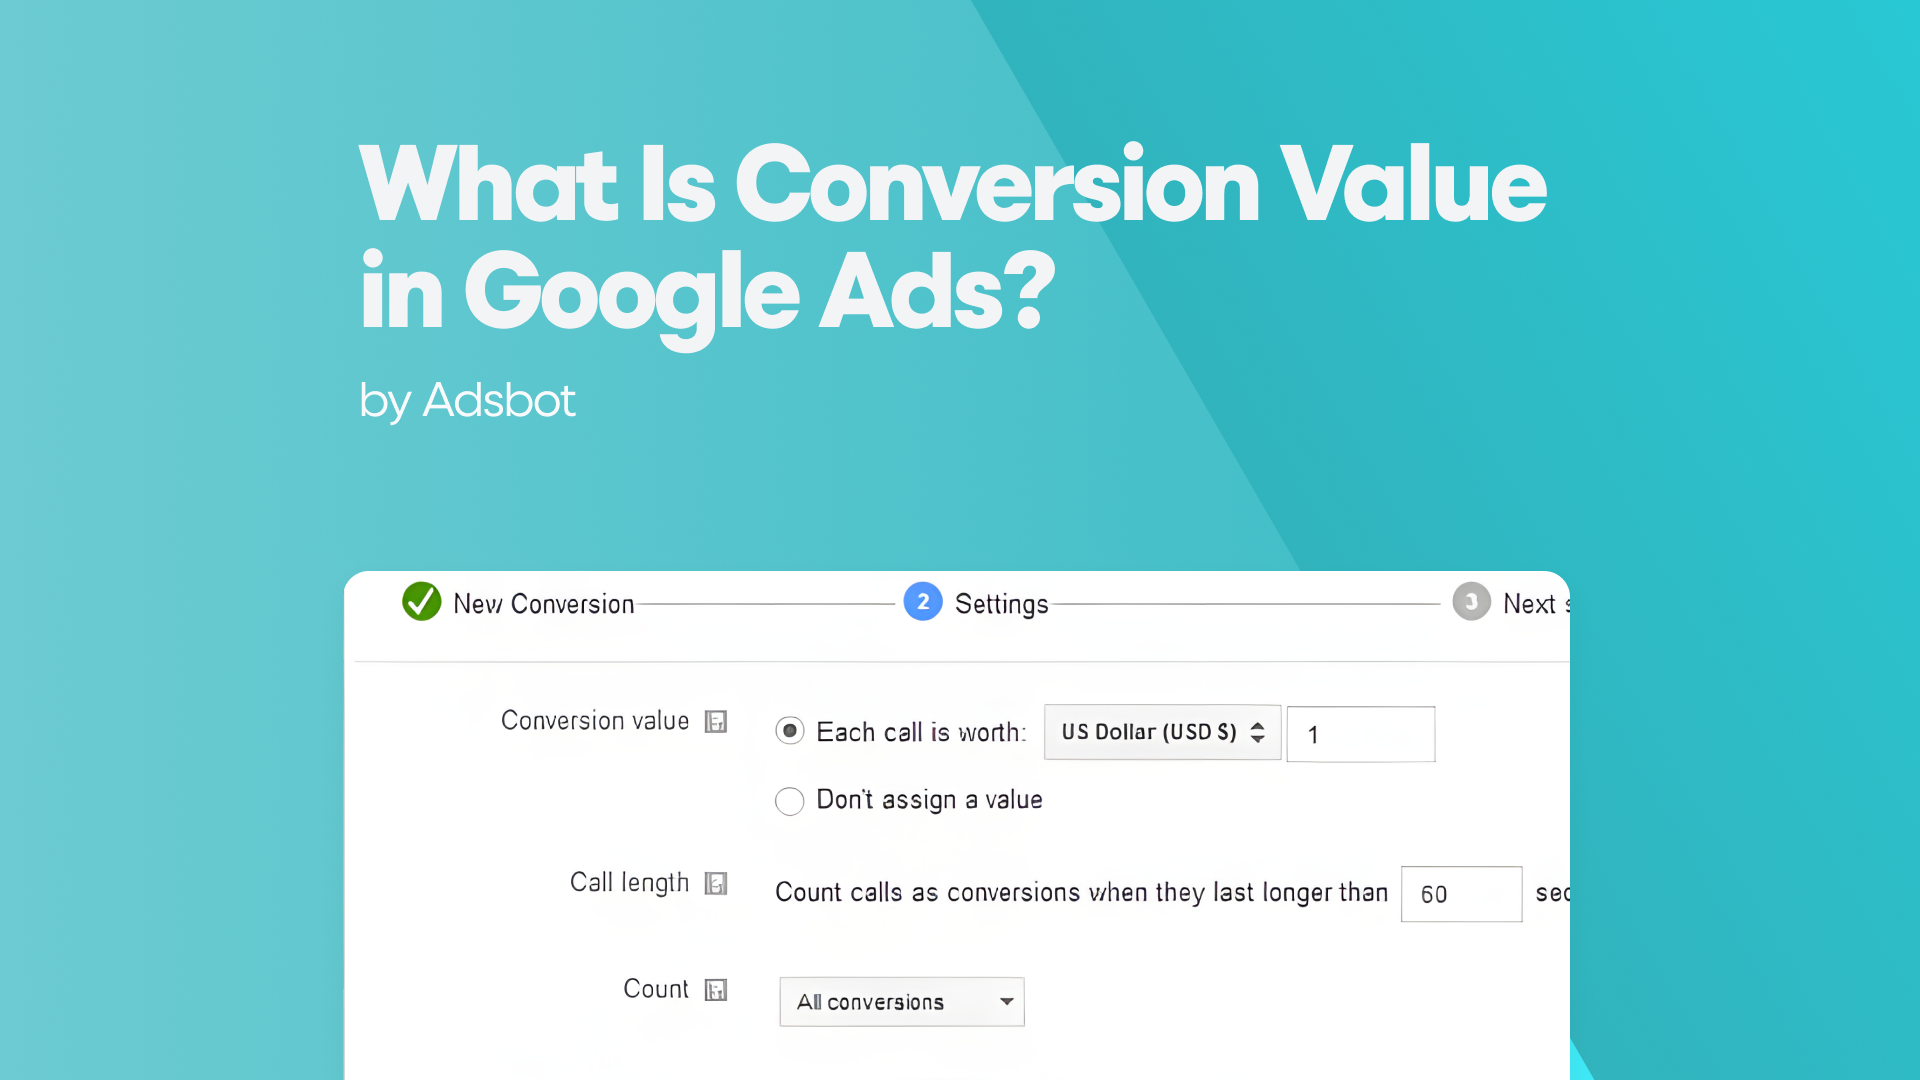 What Is Conversion Value in Google Ads?